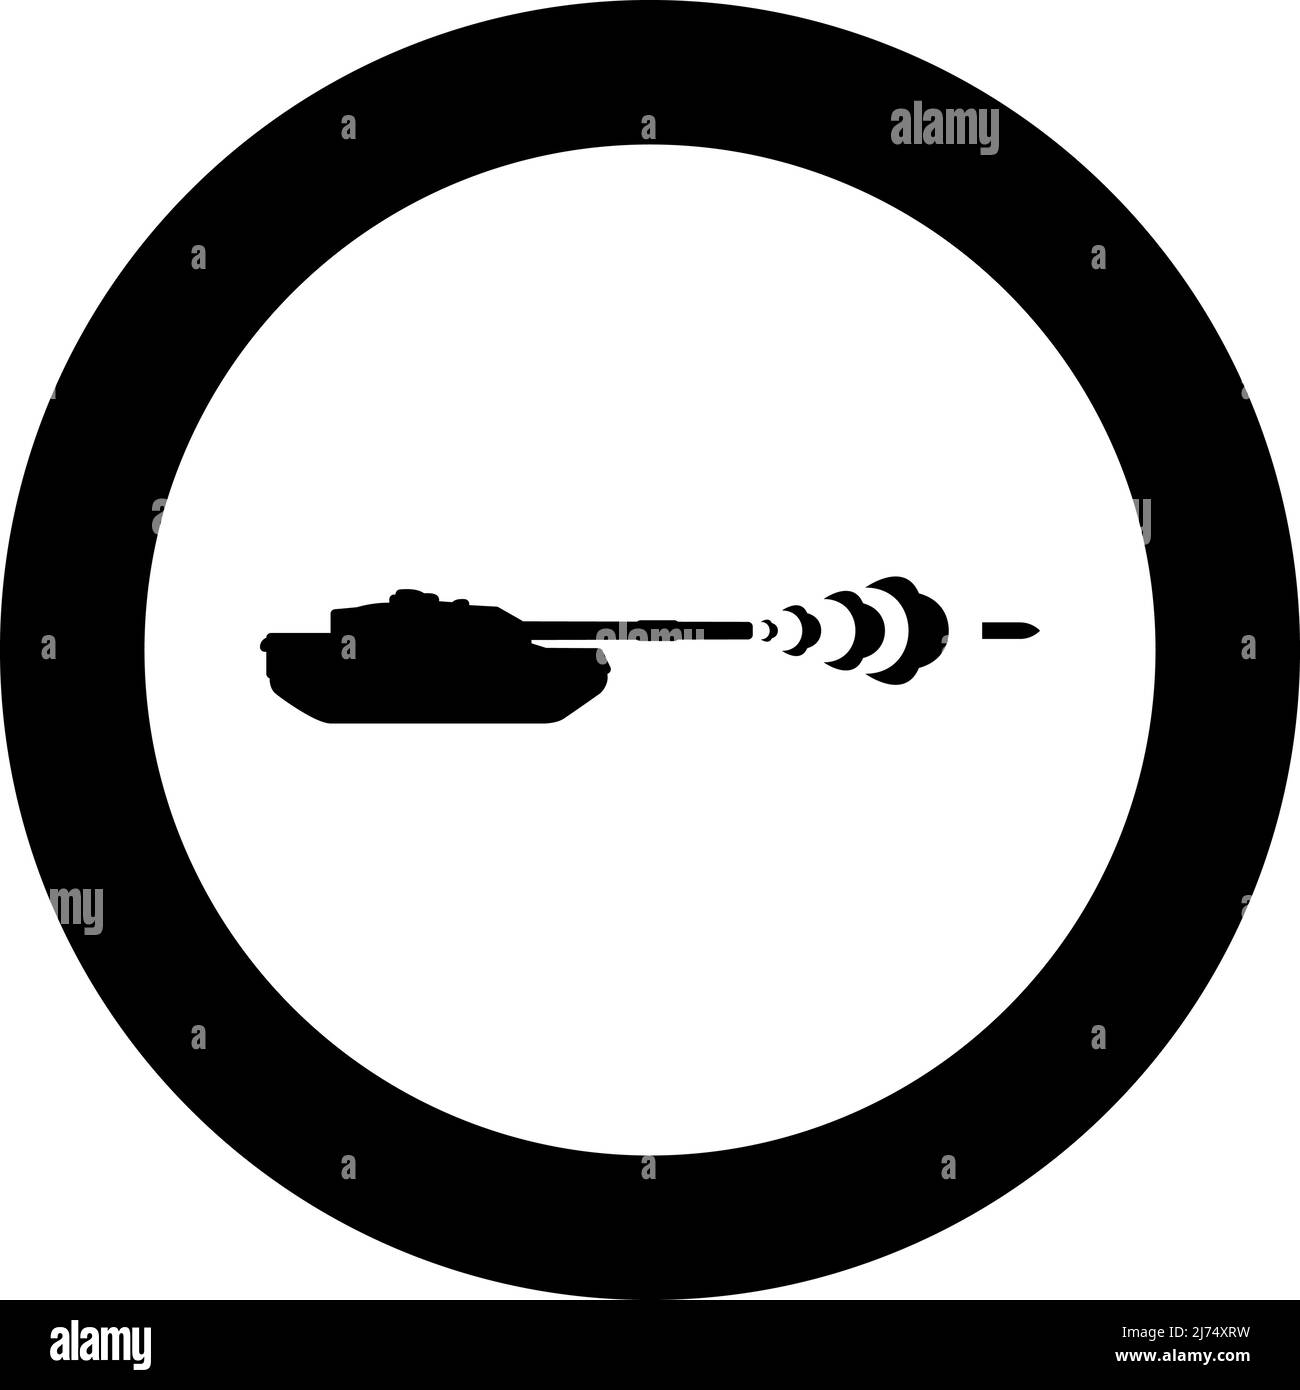 Tank shooting projectile shell military smoking after shot war battle concept icon in circle round black color vector illustration image solid Stock Vector